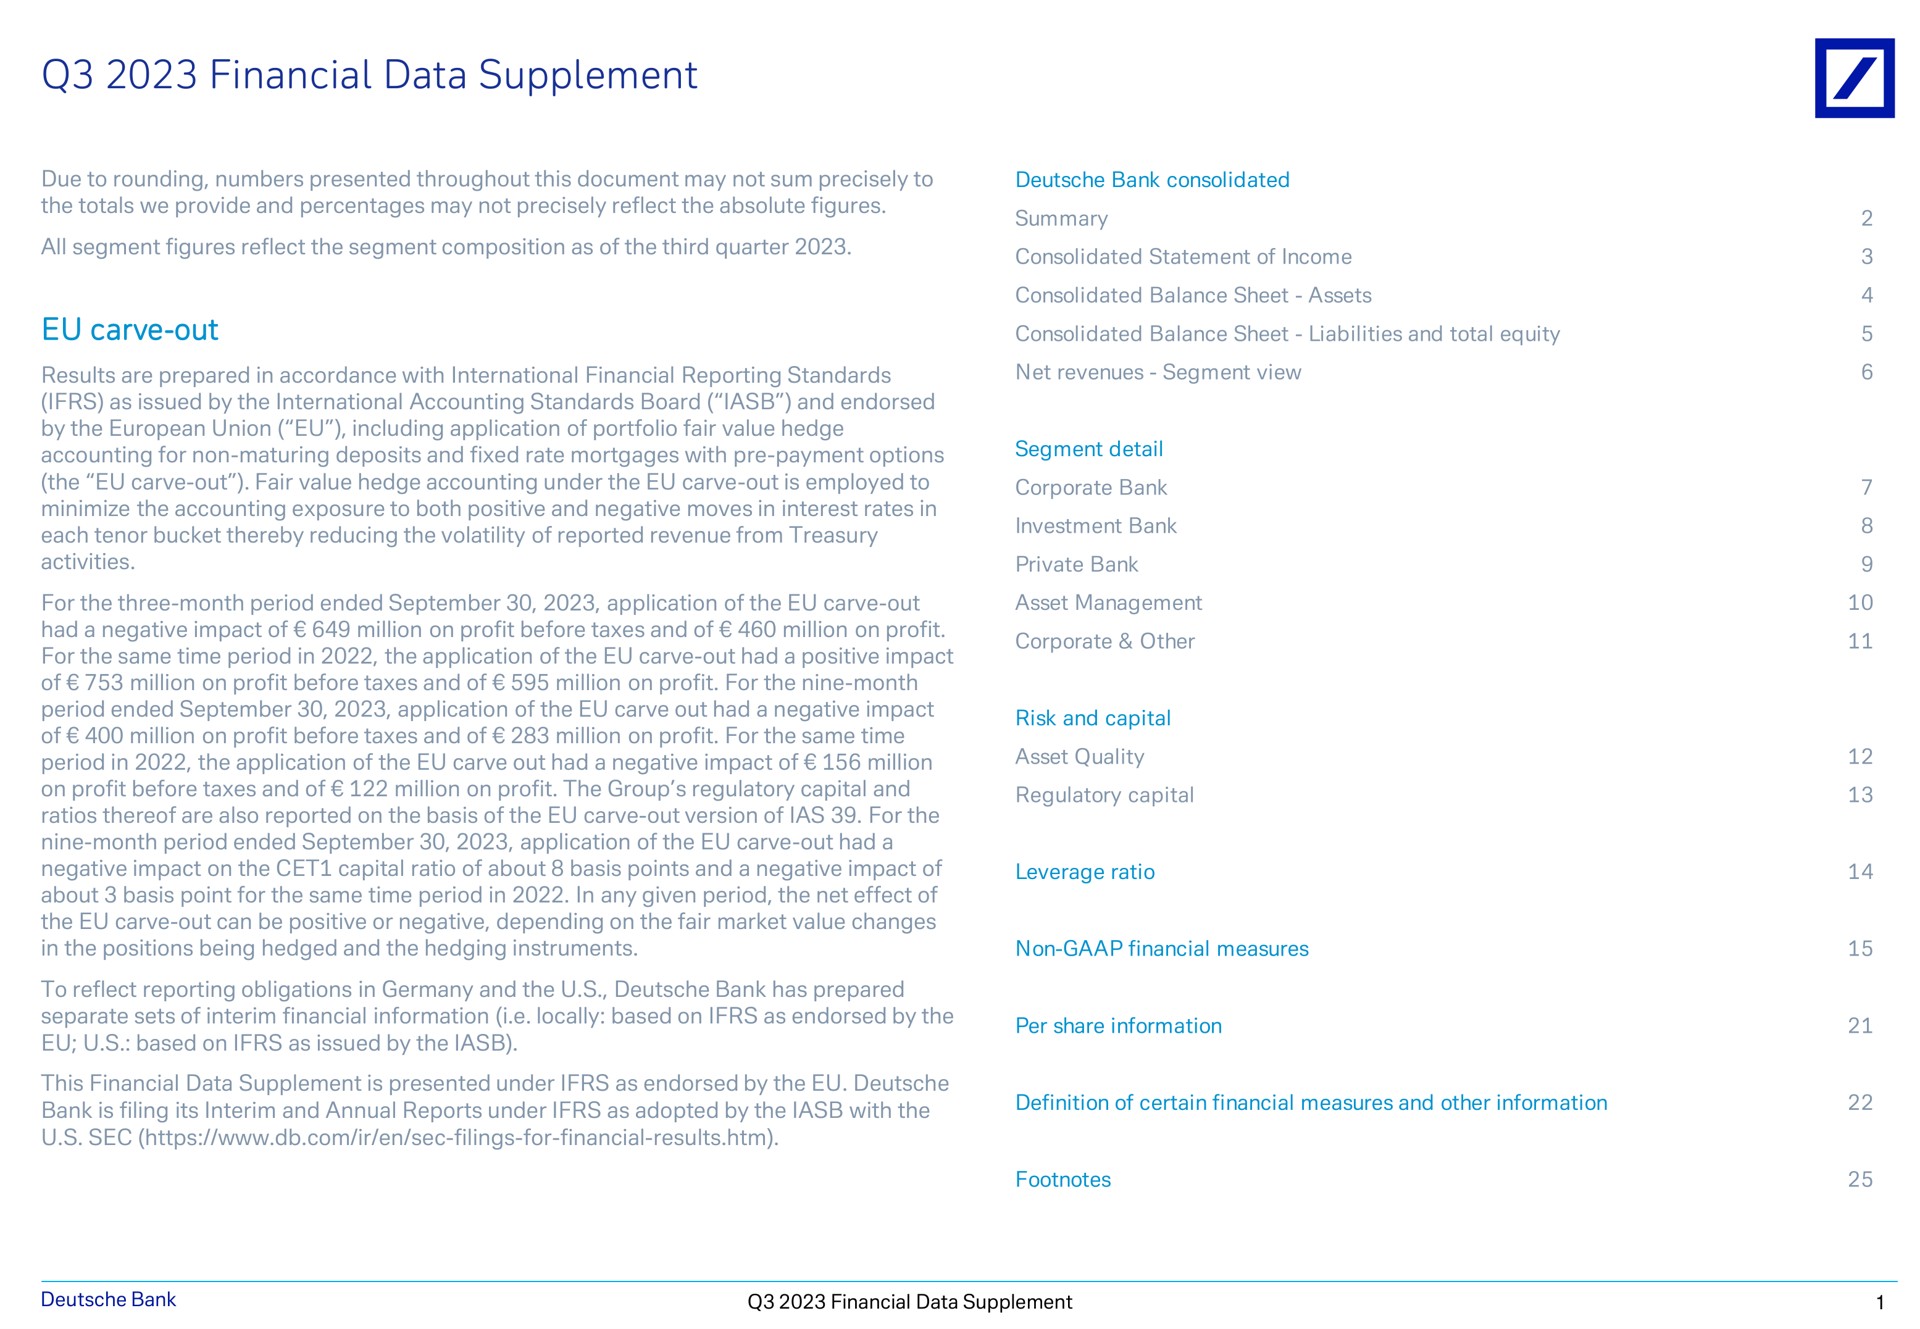 financial data supplement carve out due to rounding numbers presented throughout this document may not sum precisely to the totals we provide and percentages may not precisely reflect the absolute figures all segment figures reflect the segment composition as of the third quarter results are prepared in accordance with international reporting standards as issued by the international accounting standards board and endorsed by the union including application of portfolio fair value hedge accounting for non maturing deposits and fixed rate mortgages with payment options the fair value hedge accounting under the is employed to minimize the accounting exposure to both positive and negative moves in interest rates in each tenor bucket thereby reducing the volatility of reported revenue from treasury activities for the three month period ended application of the had a negative impact of million on profit before taxes and of million on profit for the same time period in the application of the had a positive impact of million on profit before taxes and of million on profit for the nine month period ended application of the carve out had a negative impact of million on profit before taxes and of million on profit for the same time period in the application of the carve out had a negative impact of million on profit before taxes and of million on profit the group regulatory capital and ratios thereof are also reported on the basis of the version of for the nine month period ended application of the had a negative impact on the capital ratio of about basis points and a negative impact of about basis point for the same time period in in any given period the net effect of the can be positive or negative depending on the fair market value changes in the positions being hedged and the hedging instruments bank consolidated summary consolidated statement of income consolidated balance sheet assets consolidated balance sheet liabilities and total equity net revenues segment view segment detail corporate bank investment bank private bank asset management corporate other risk and capital asset quality regulatory capital leverage ratio non measures to reflect reporting obligations in and the bank has prepared separate sets of interim information i locally based on as endorsed by the based on as issued by the per share information this is presented under as endorsed by the bank is filing its interim and annual reports under as adopted by the with the sec definition of certain measures and other information footnotes bank a | Deutsche Bank